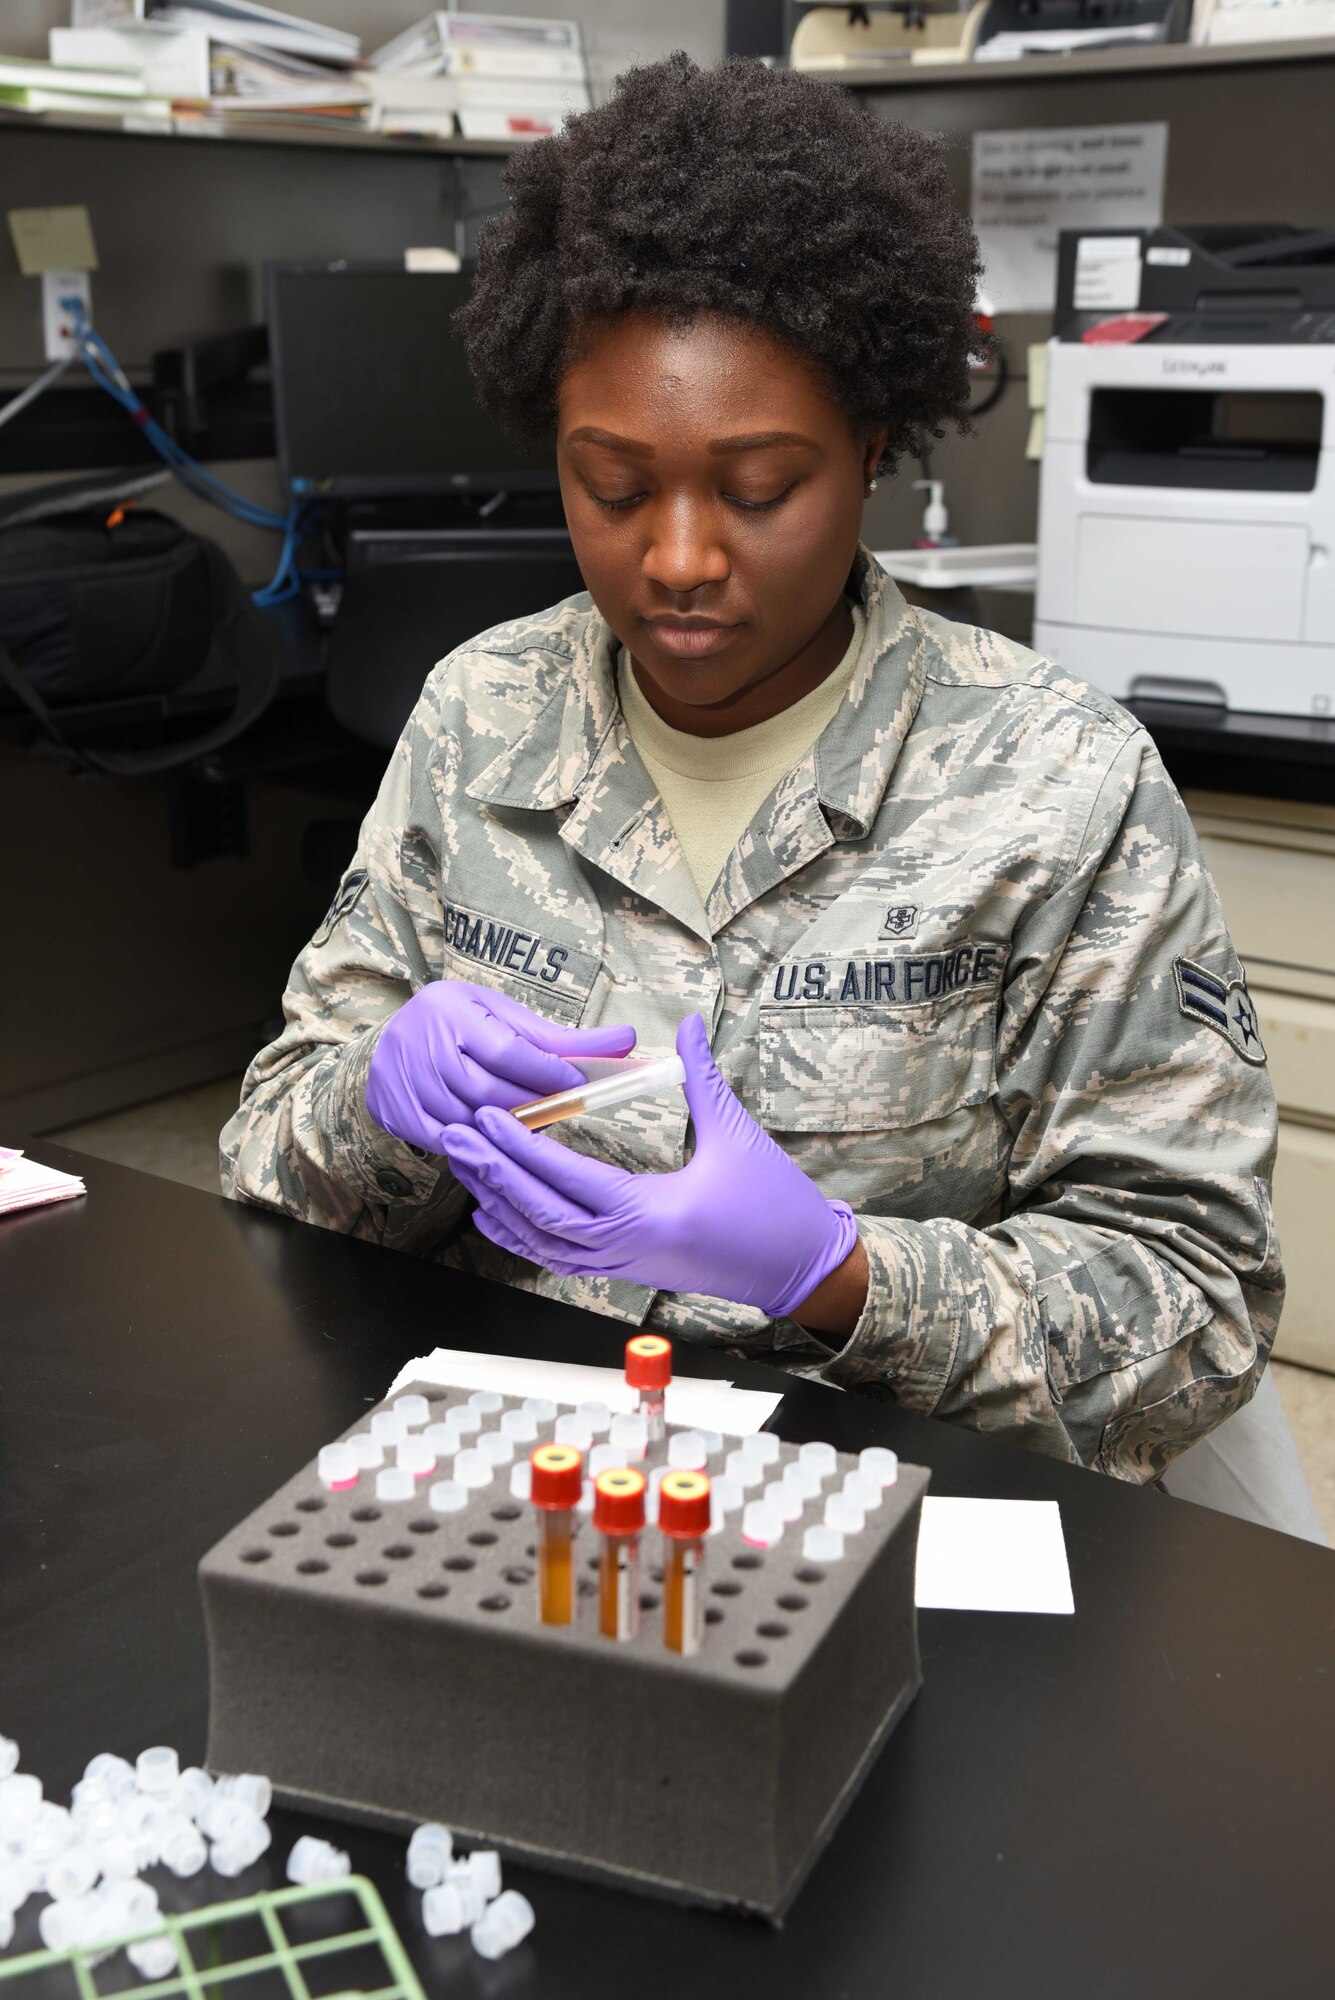 Airman 1st Class Danielle McDaniels, 403rd Aeromedical Staging Squadron aerospace medical technician, processes patient specimens for analysis Feb. 10 at Keesler Air Force Base, Mississippi. One of the roles of ASTS is to make sure that the wing’s Citizen Airmen are healthy and fit for service worldwide. (U.S. Air Force photo/Tech. Sgt. Ryan Labadens)